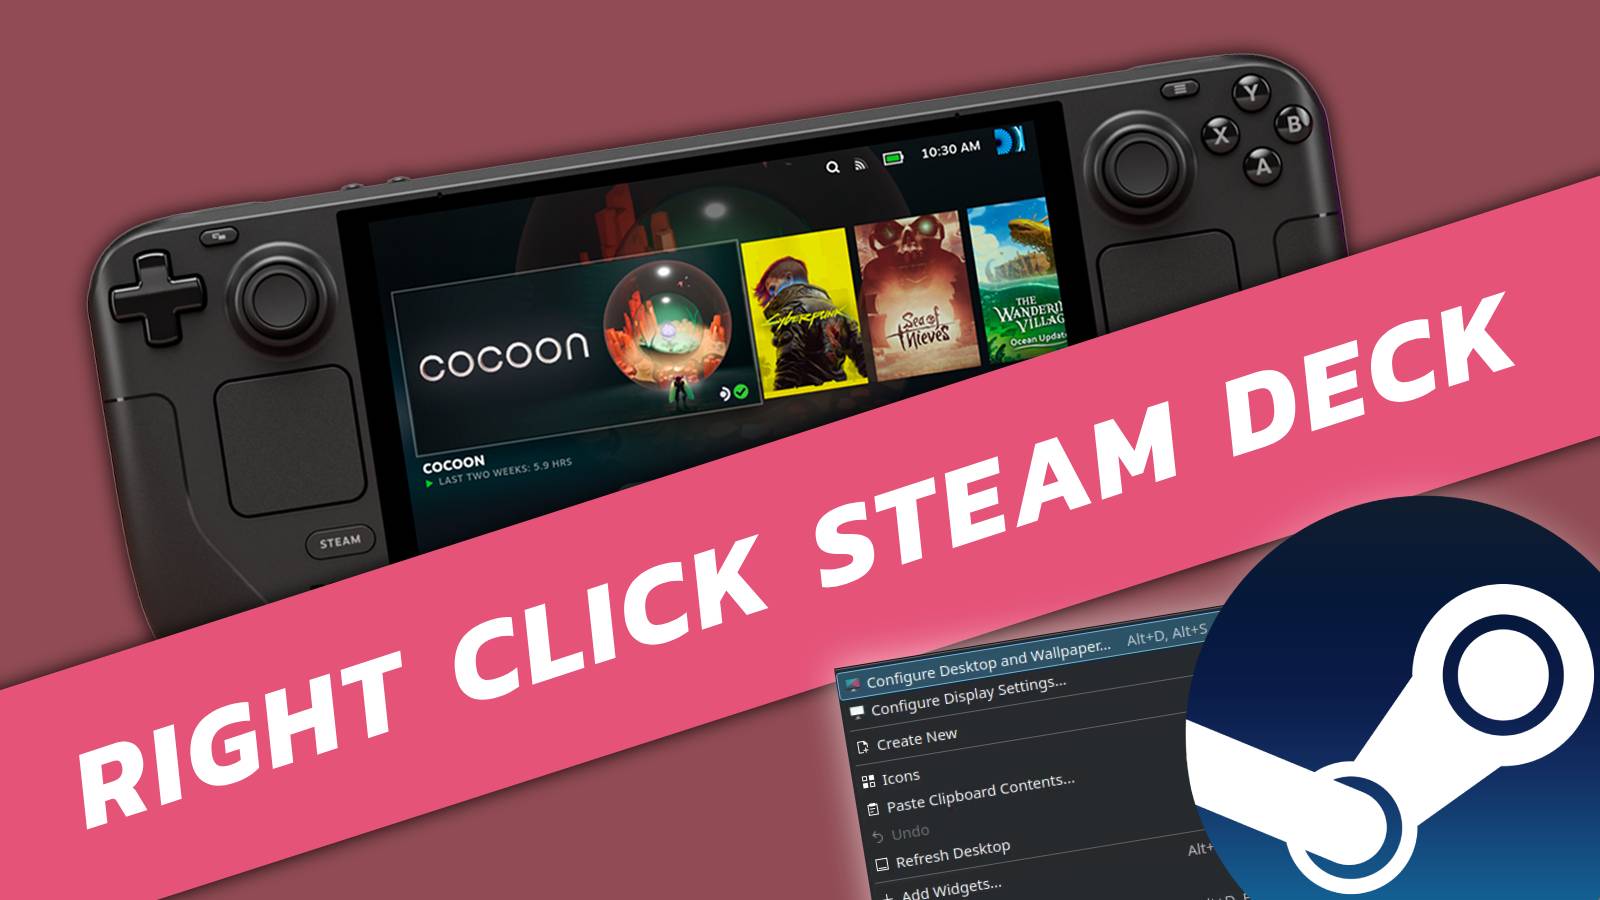 Image of a Steam Deck with a banner across it, and the Steam logo and a right-click drop-down menu in the right corner.